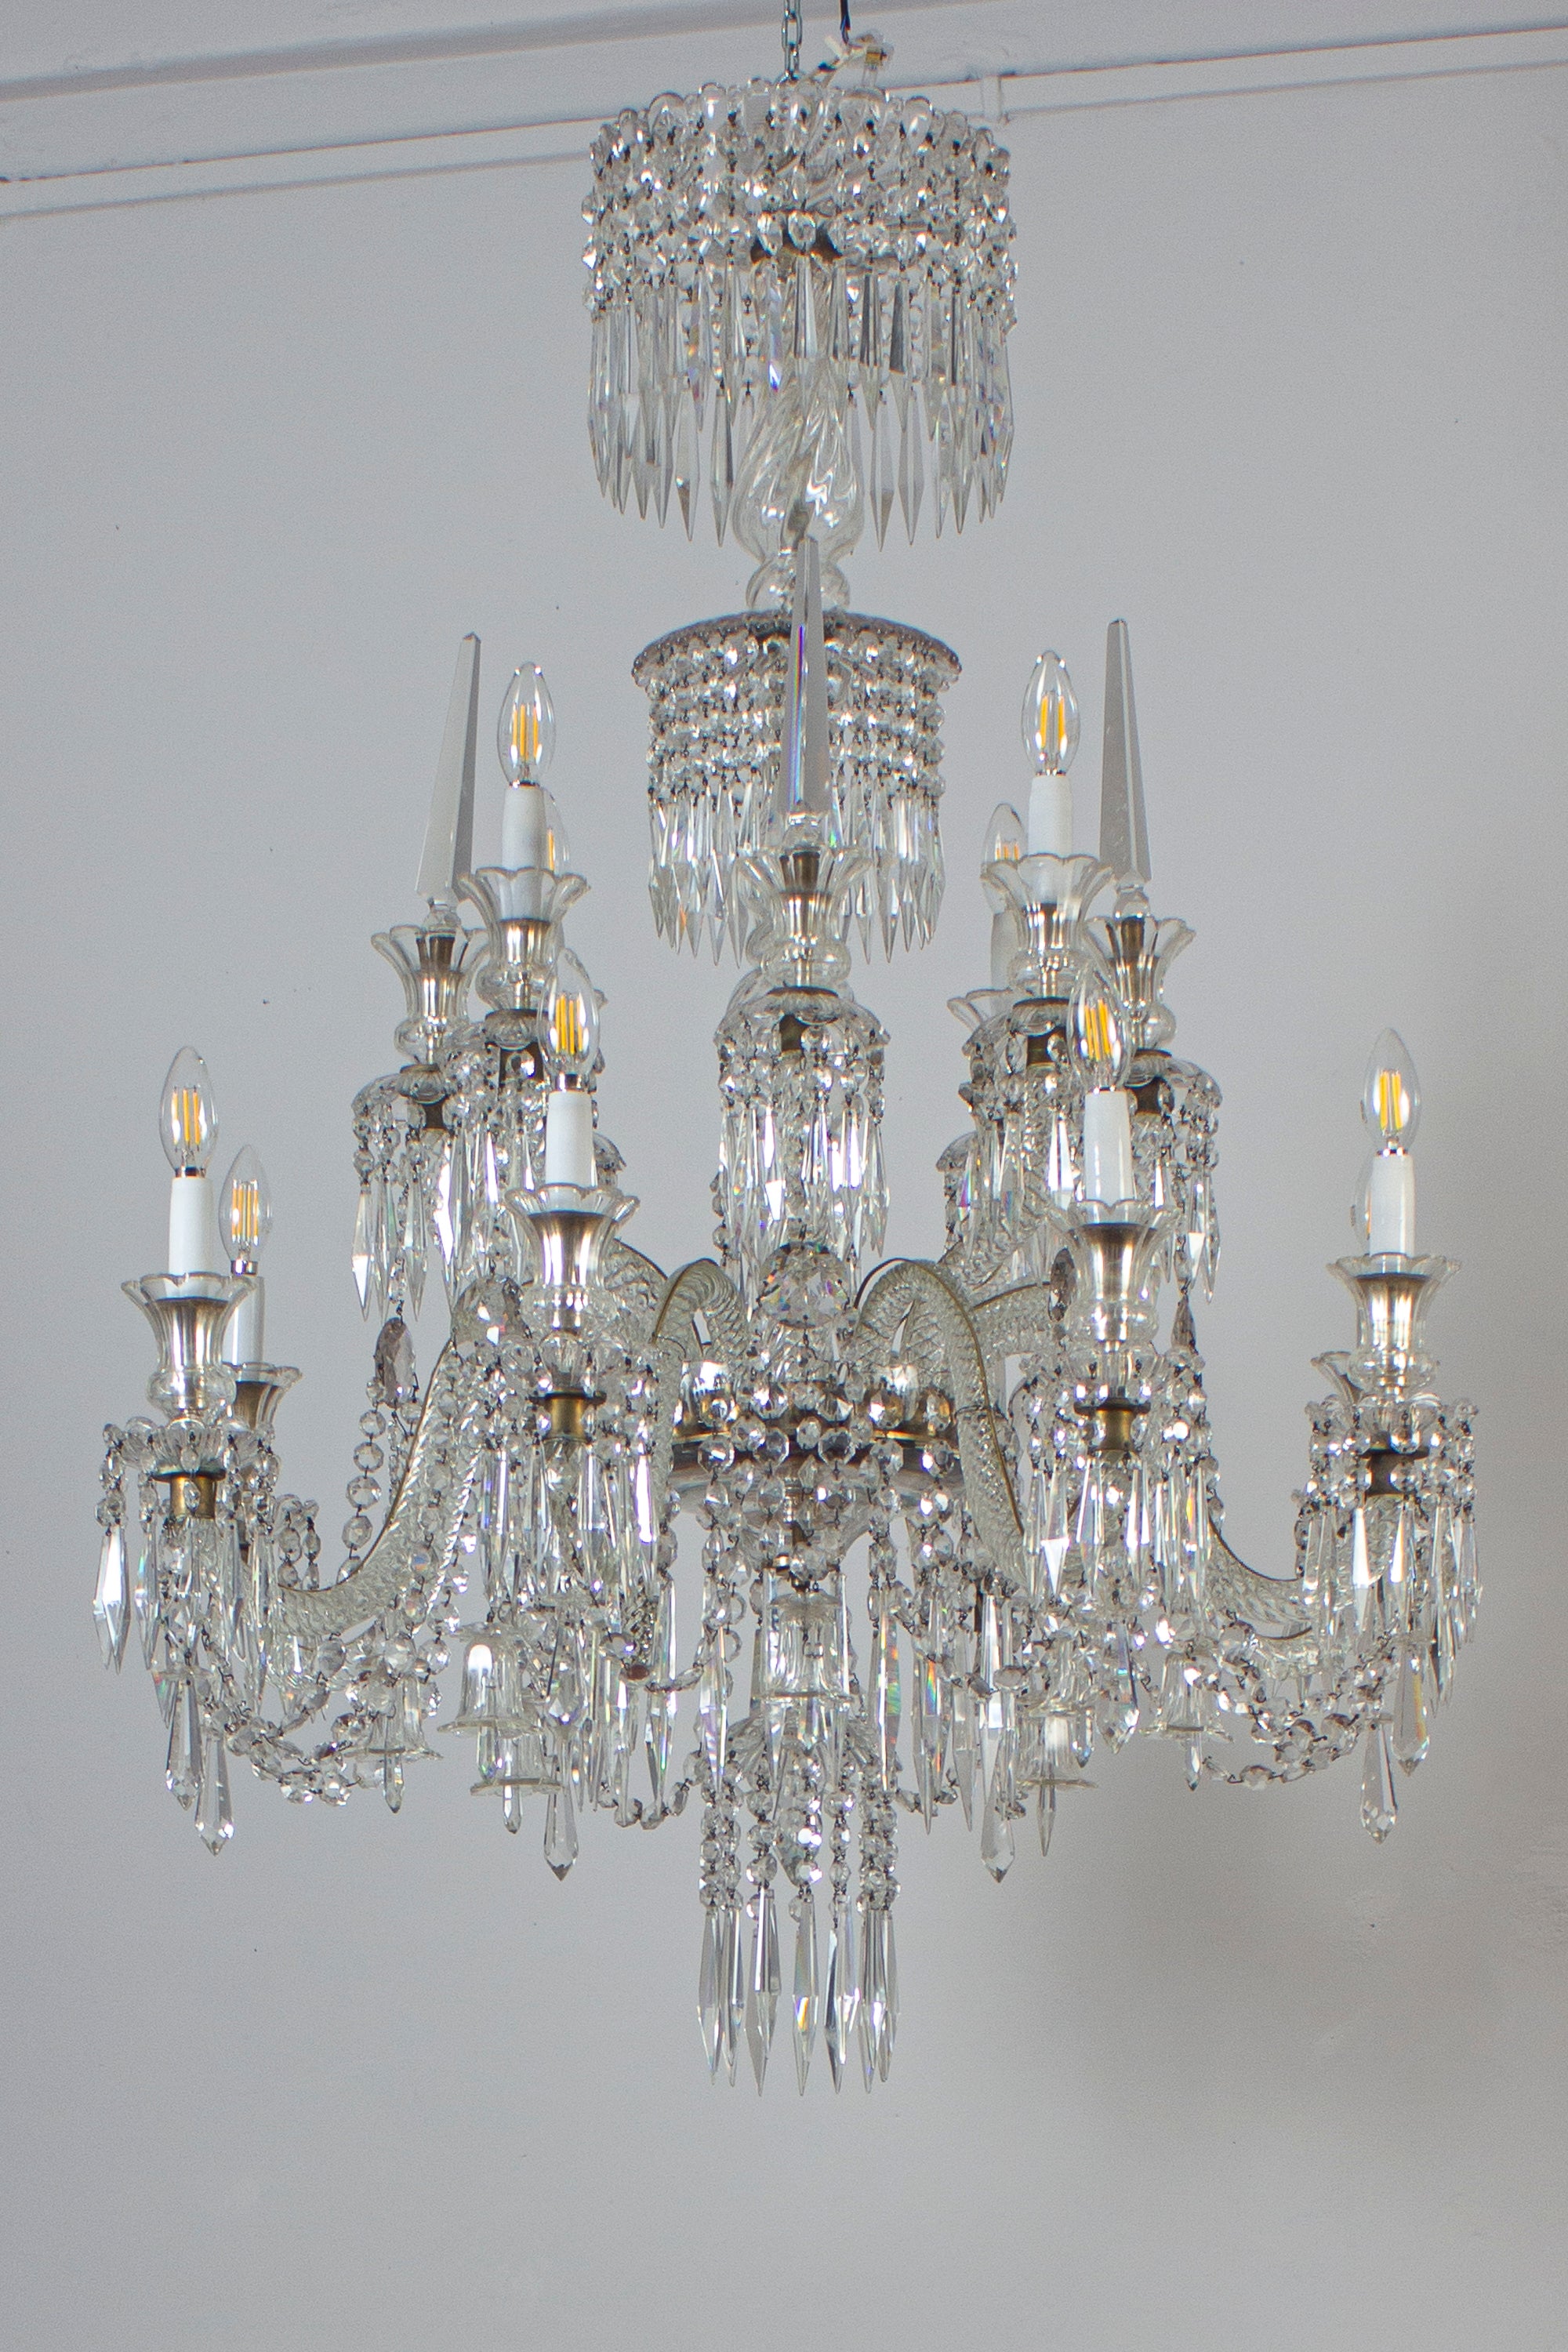 Fabulous French crystal 12 arms  Chandelier attributed to Baccarat .
The frame, made of silver plated brass. Replacing the wax candles, the first processing pattern in 